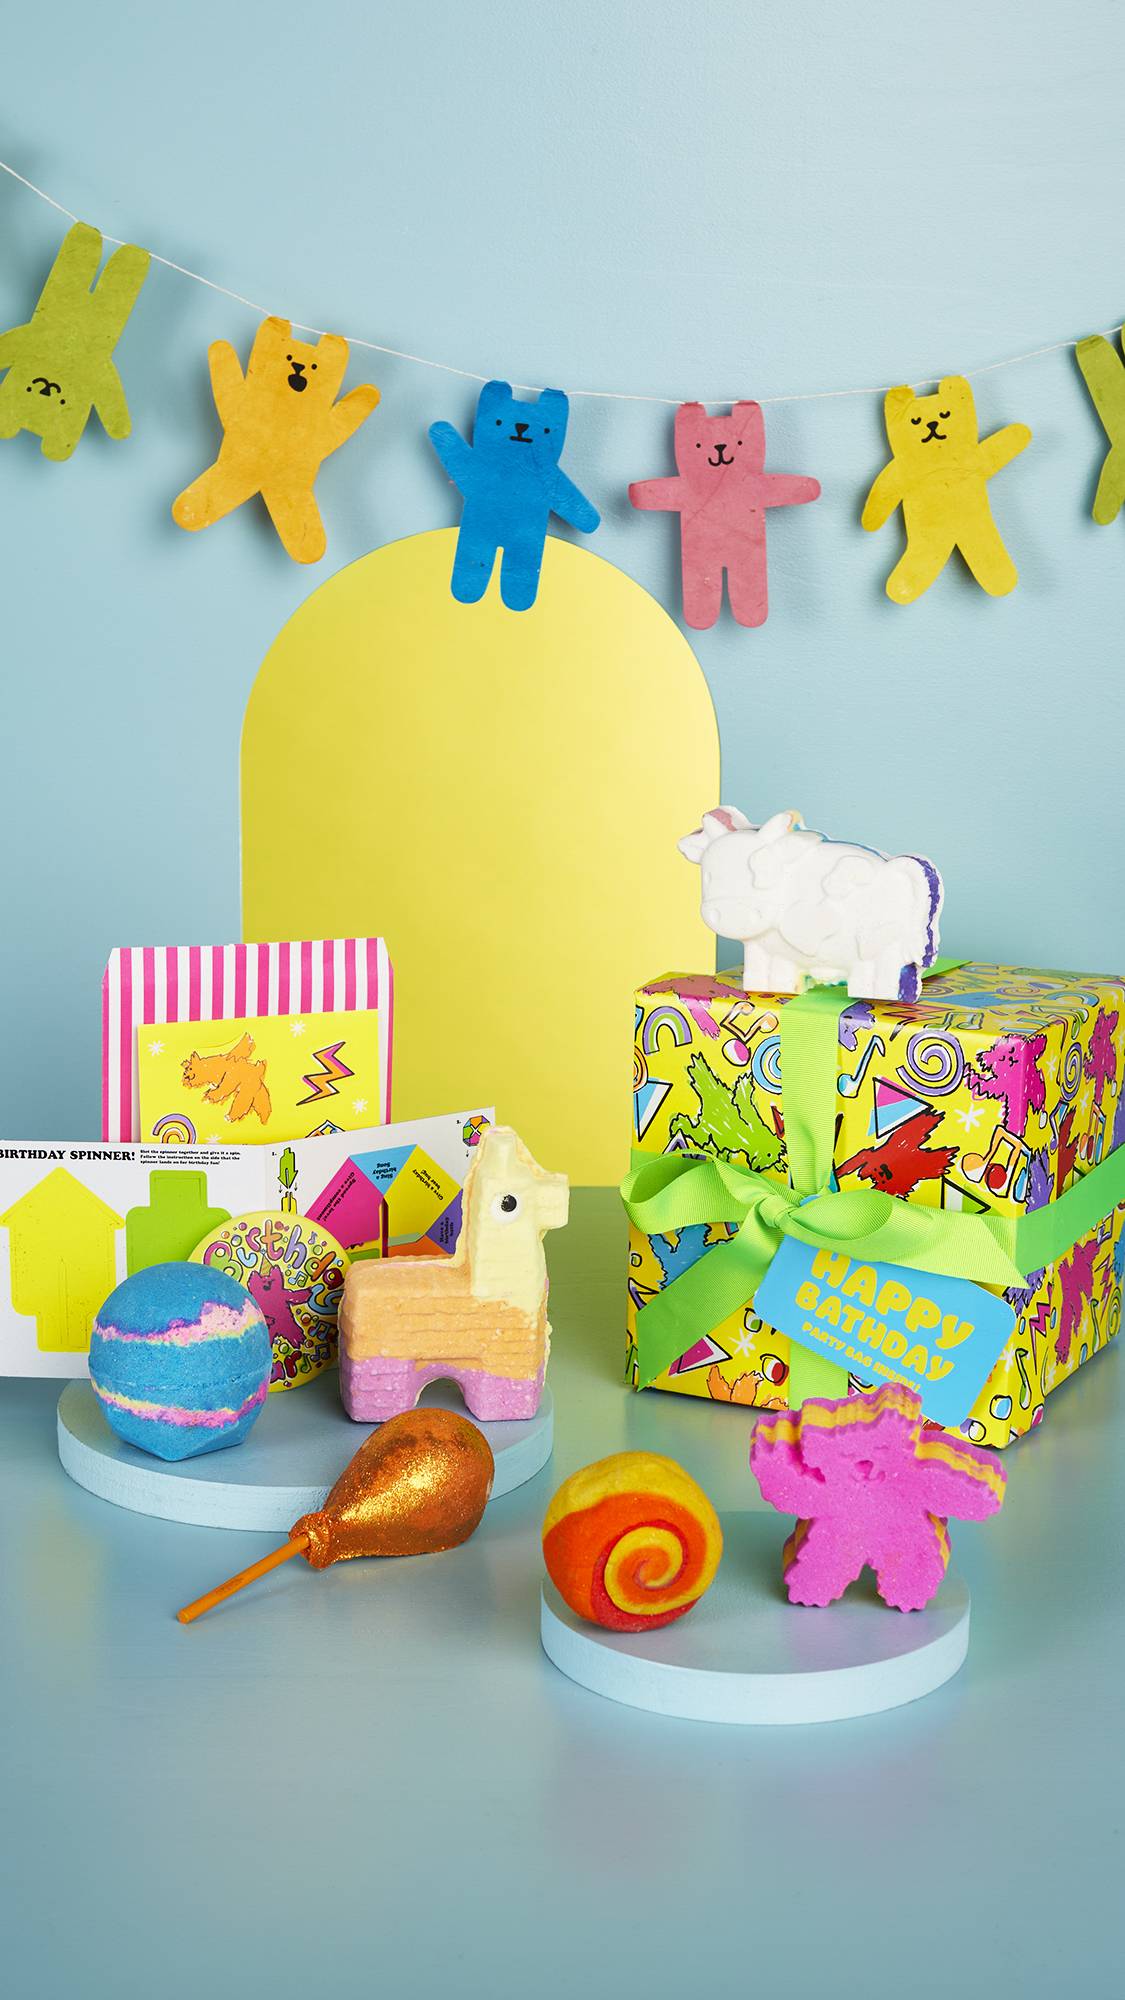 The Happy Bathday gift box, along with the six bath products and extra goodies included is sat on a pale blue background. There is a yellow arch shape behind it and a banner with different coloured dancing bears attached. 